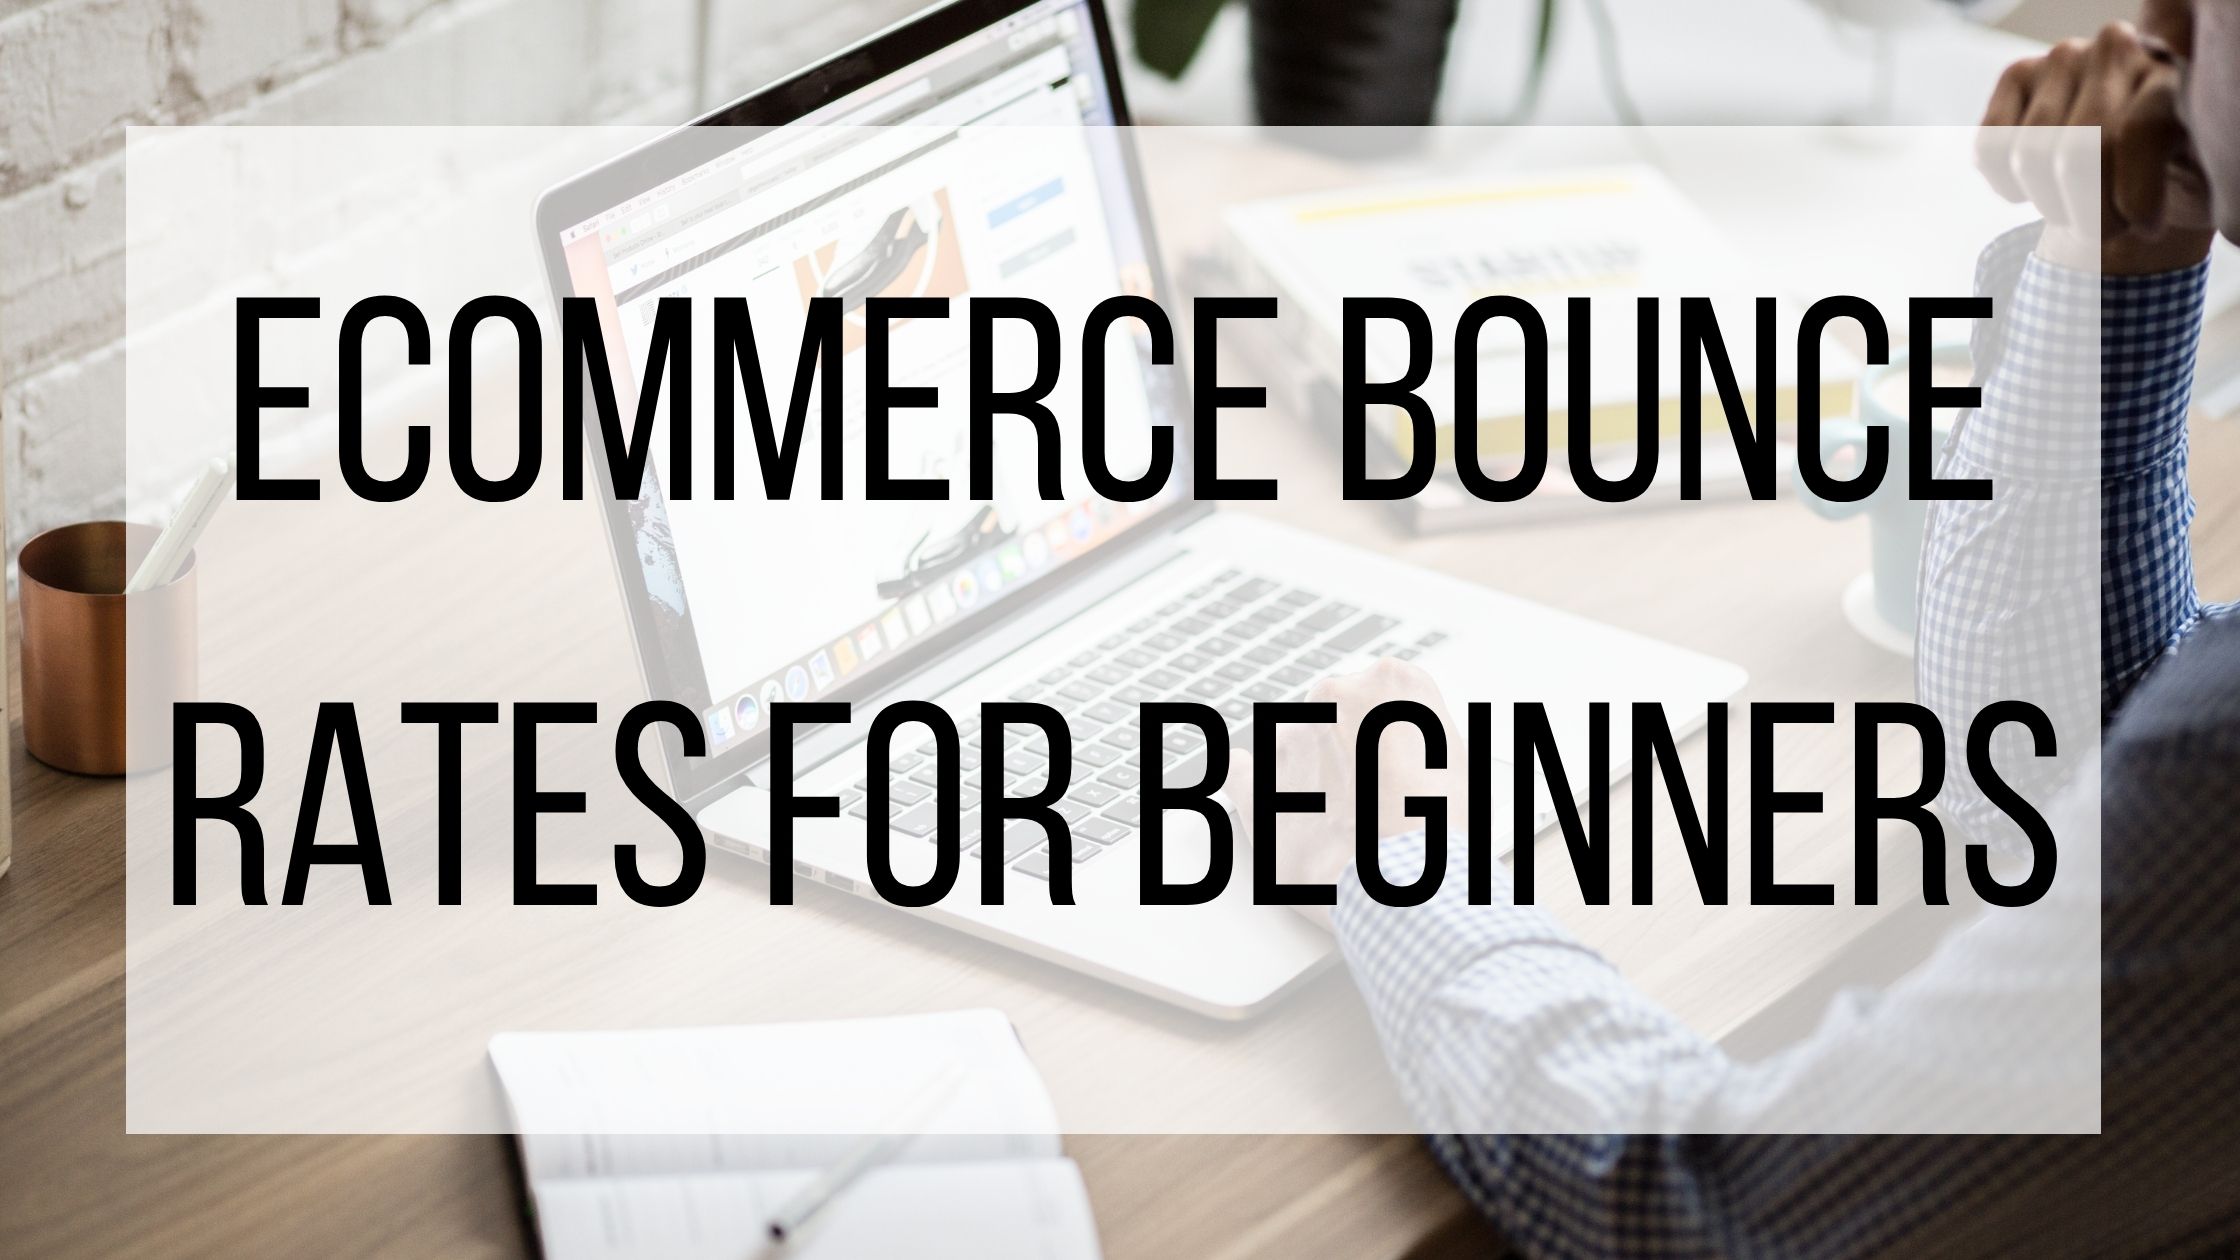 ecommerce-bounce-rates-for-beginners-bmt-micro-blog